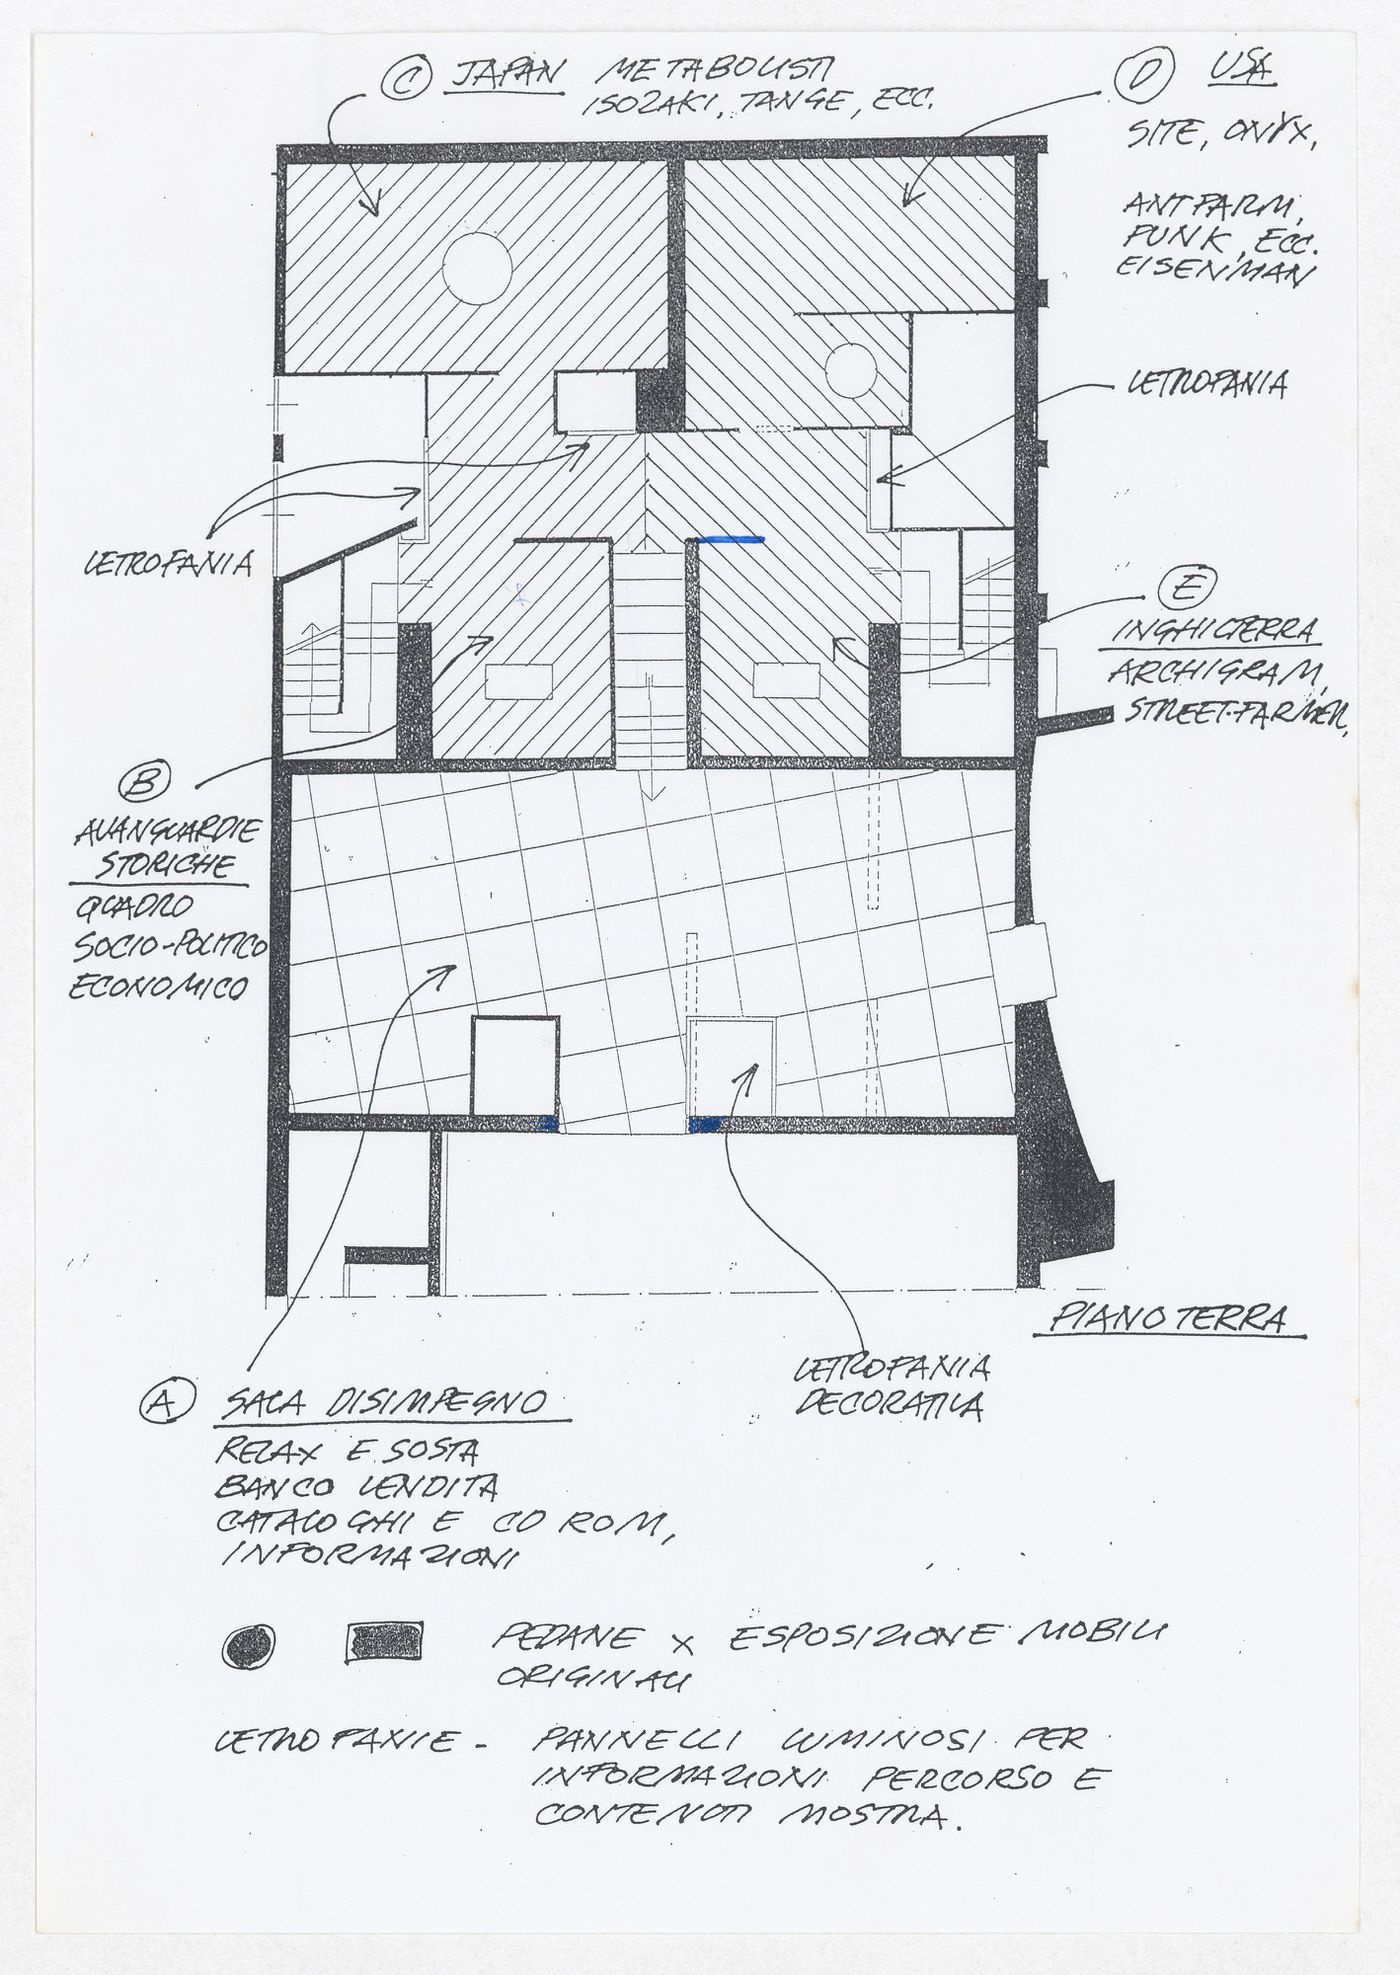 Correspondence, plans, and perspectives for the exhibition Radicals. Architettura e Design 1960-1975